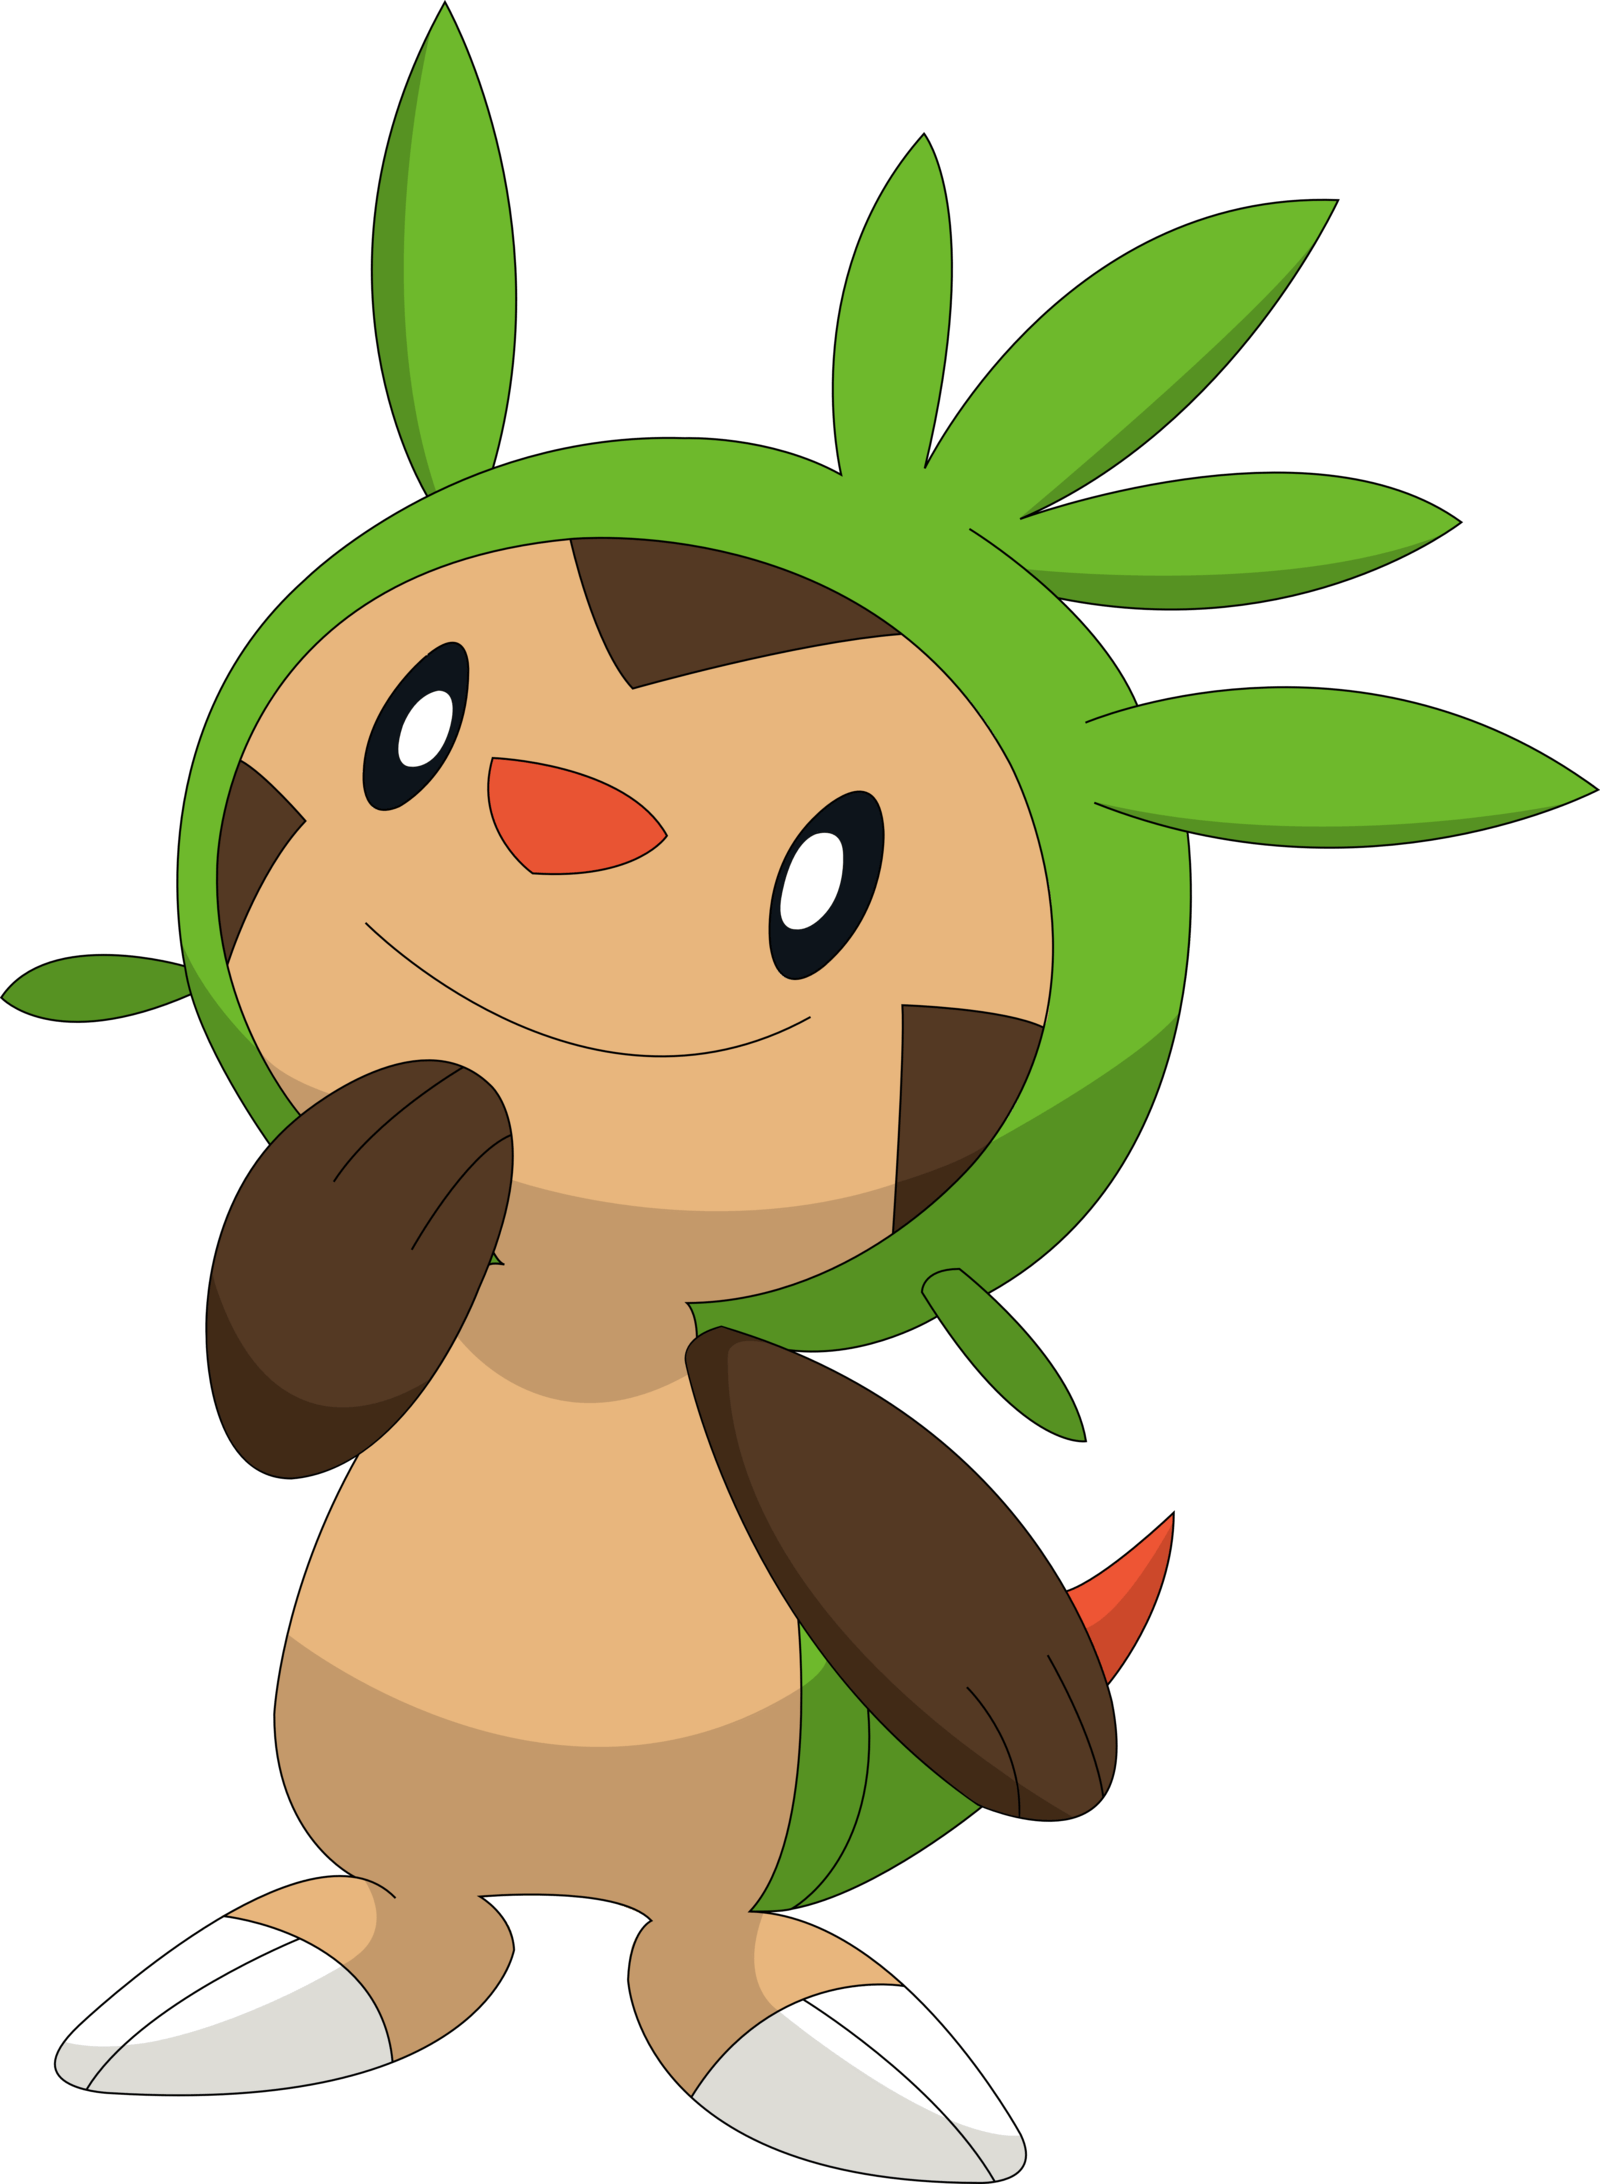 chespin - Image Search Results. pokemon party